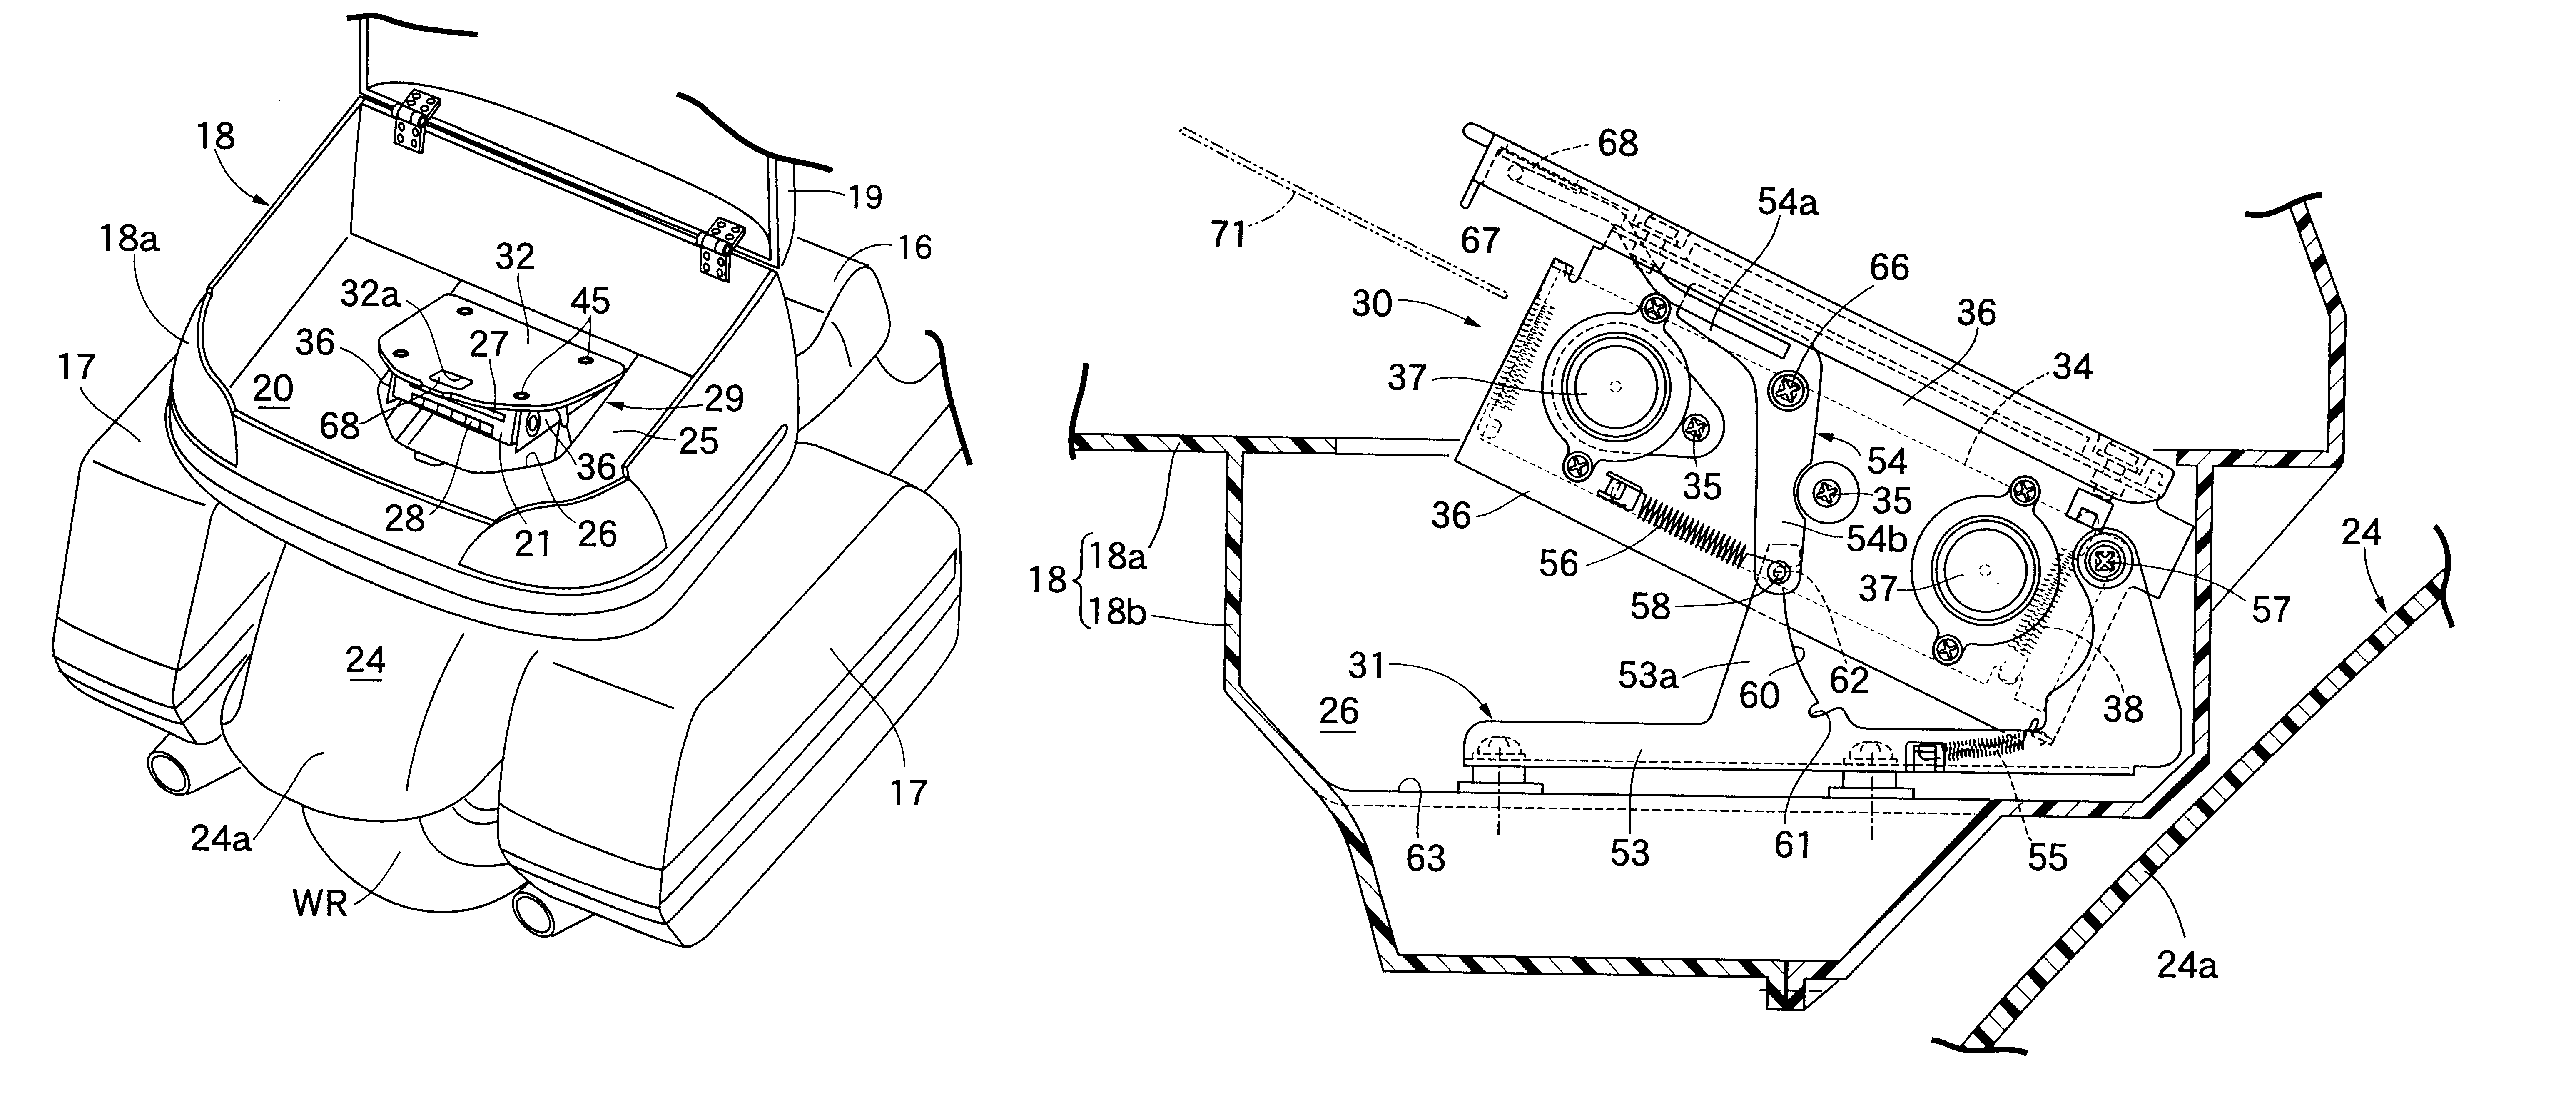 CD changer mounting structure and support device